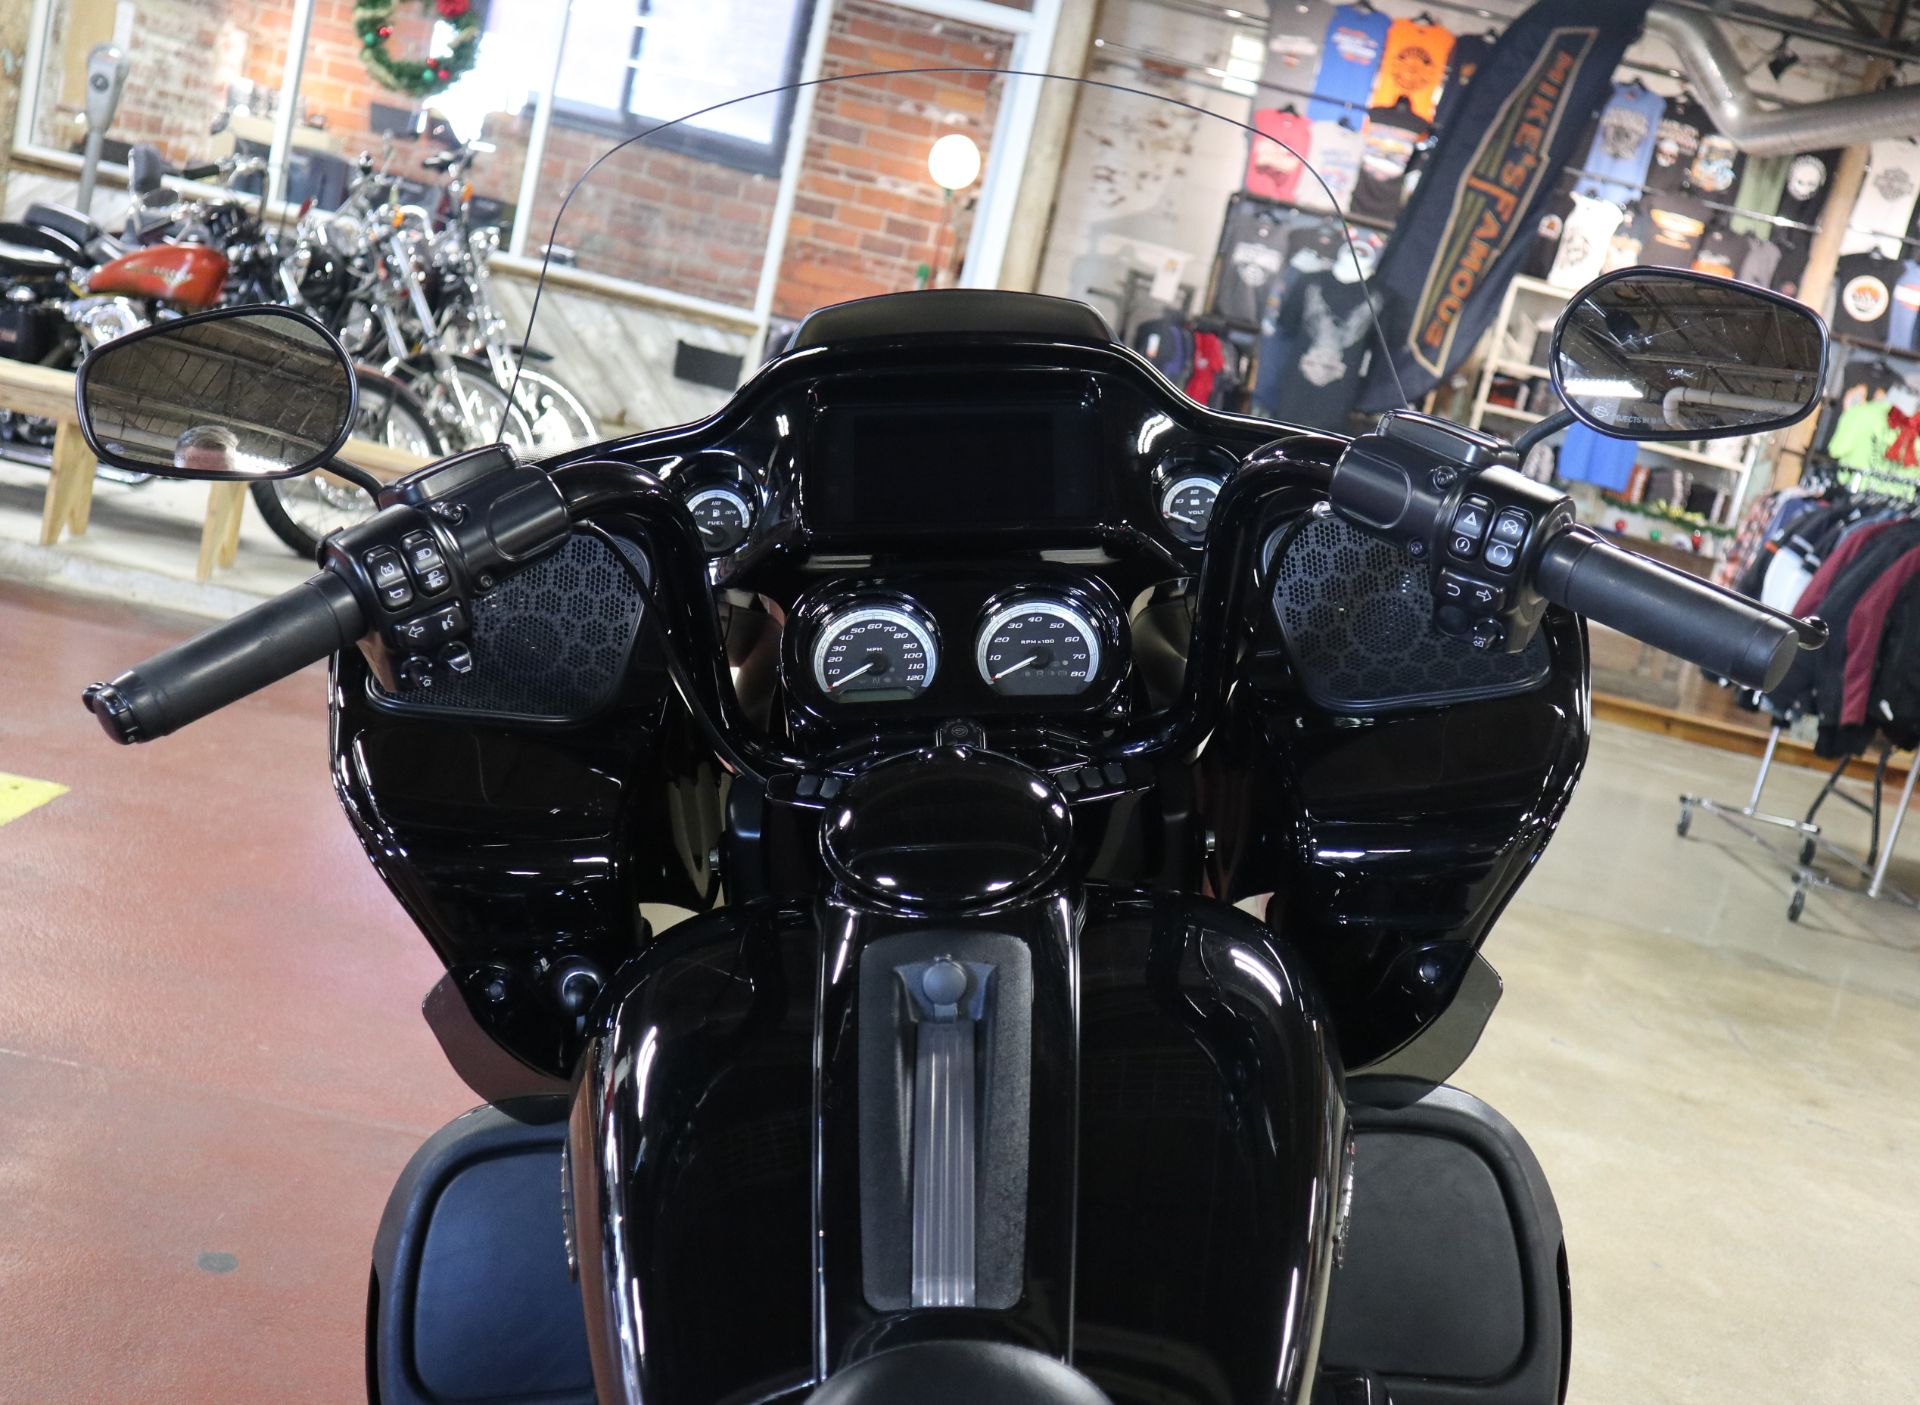 2020 Harley-Davidson Road Glide® Limited in New London, Connecticut - Photo 11